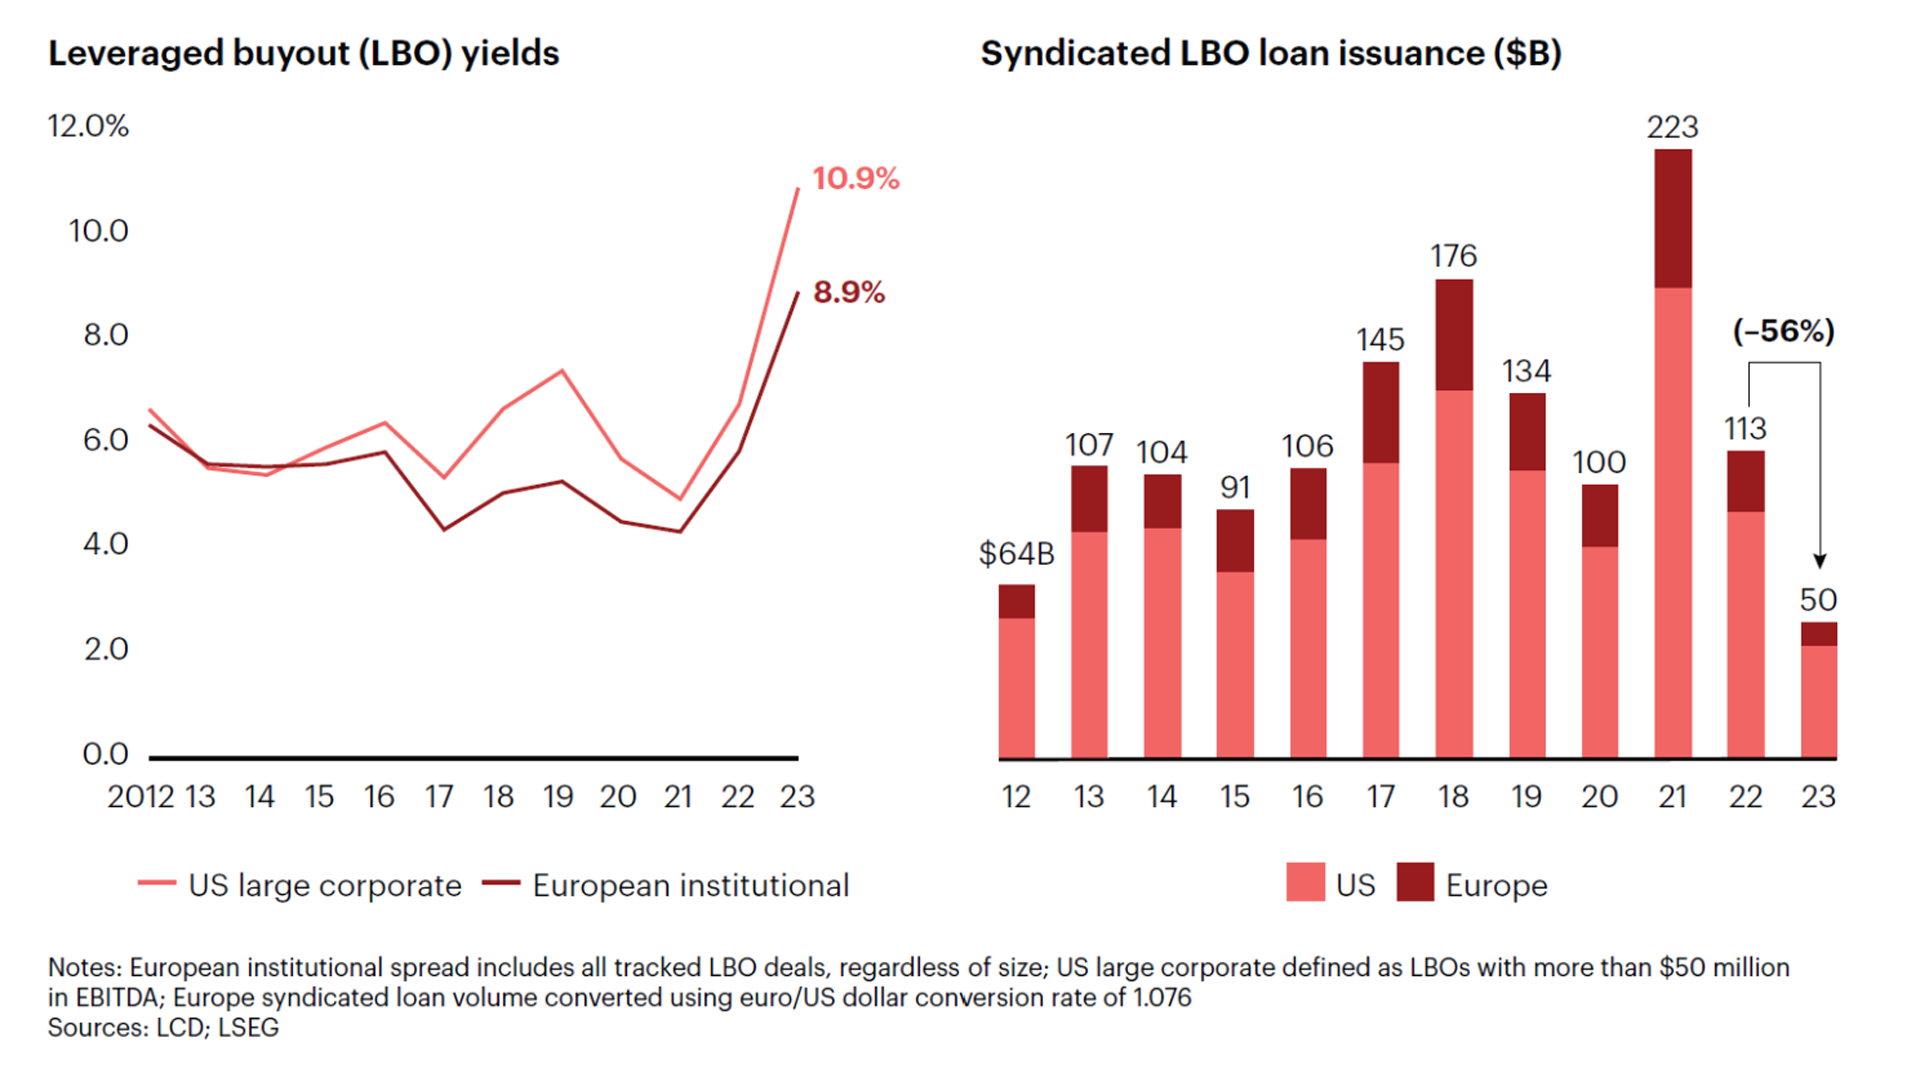 LBO Yields and Syndicated LBO Loan Issuance